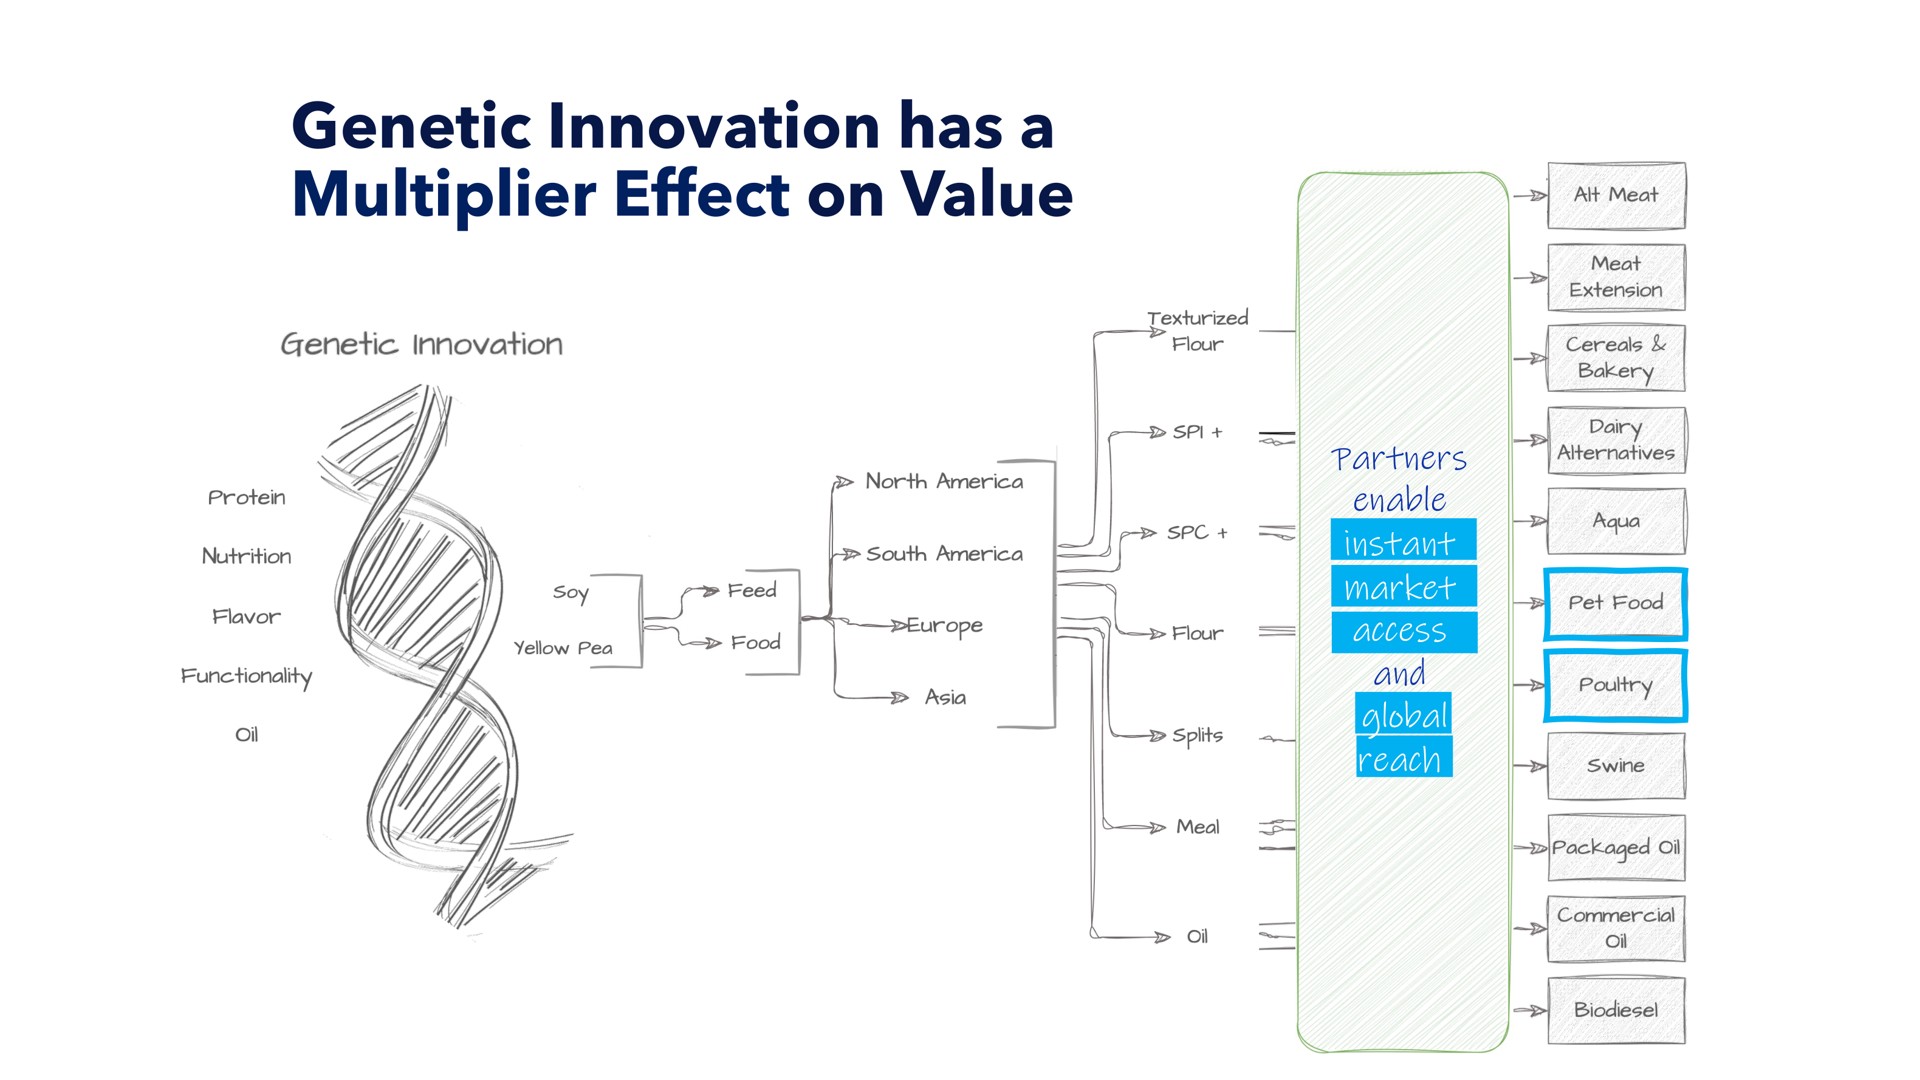 genetic innovation has a multiplier effect on value partners enable instant market access and global reach i i | Benson Hill